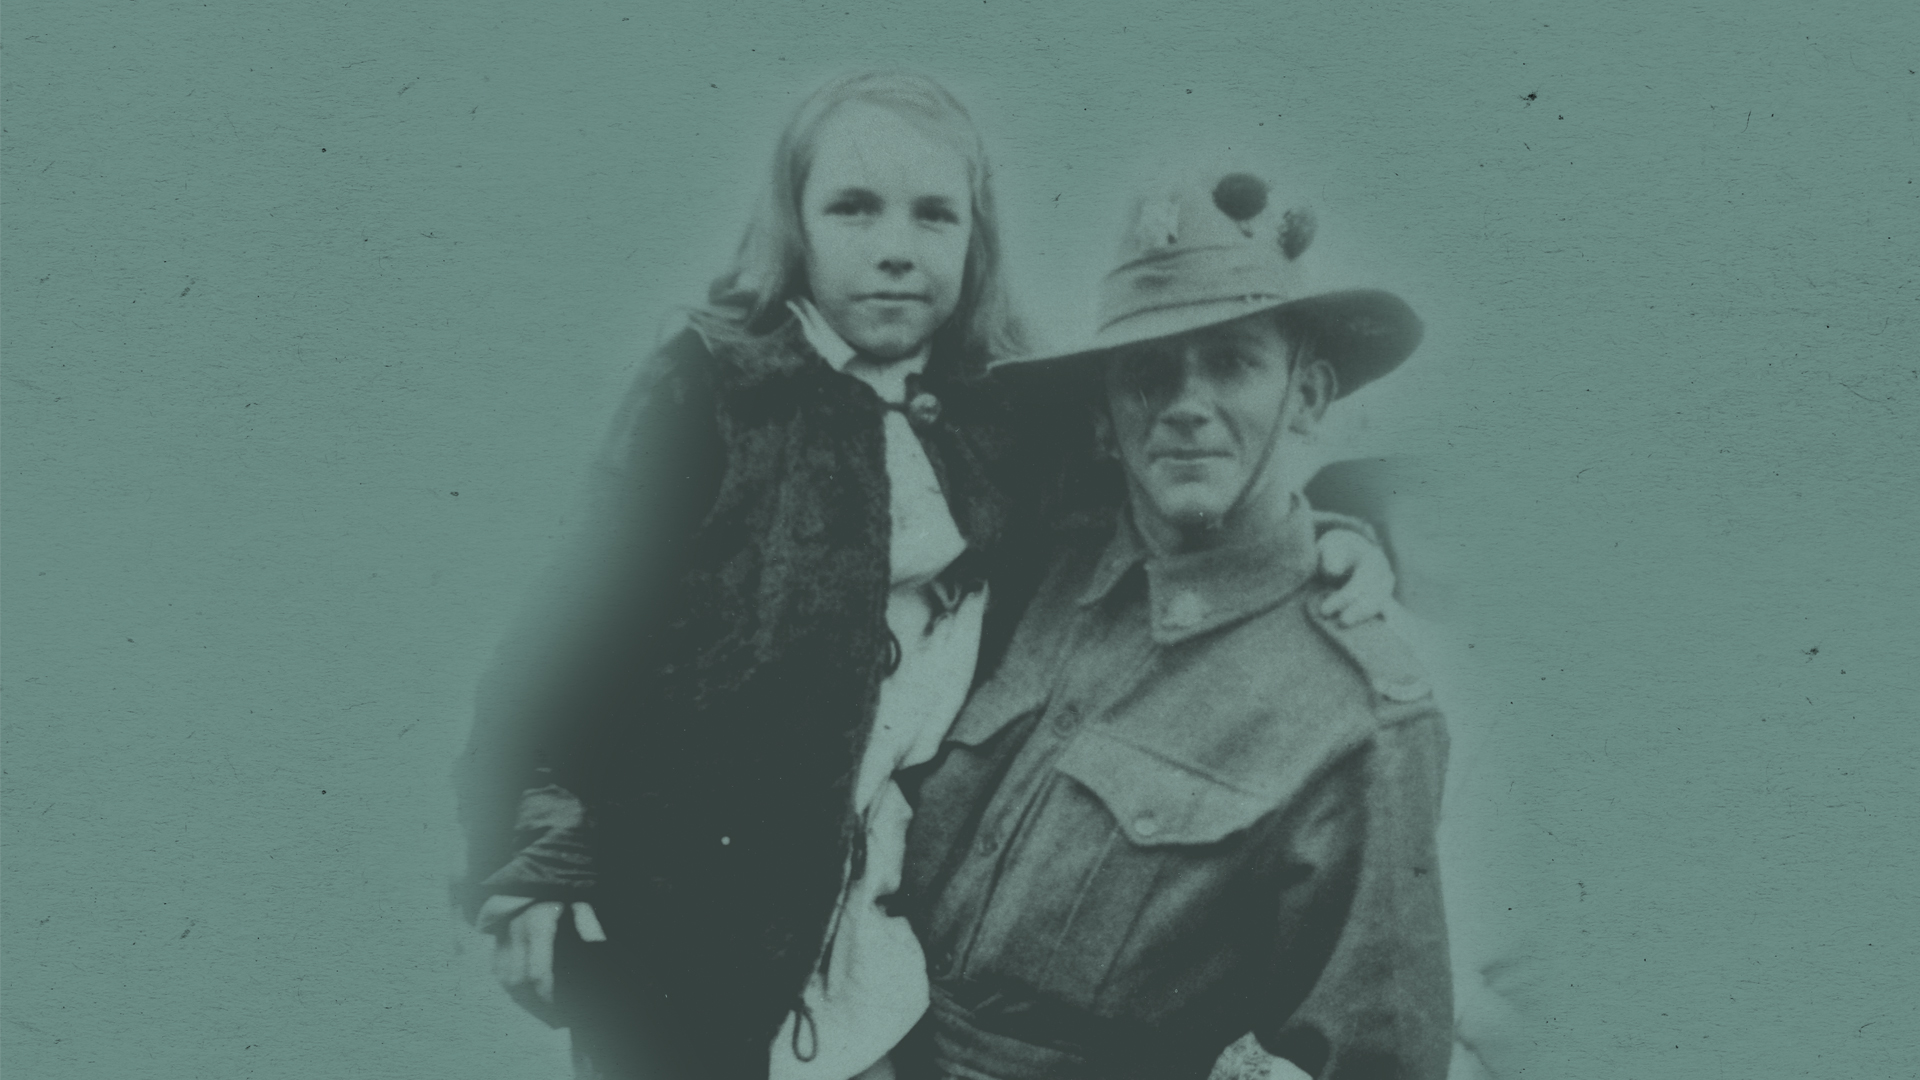 Rendered image of WW1 soldier and young girl posing for a photo